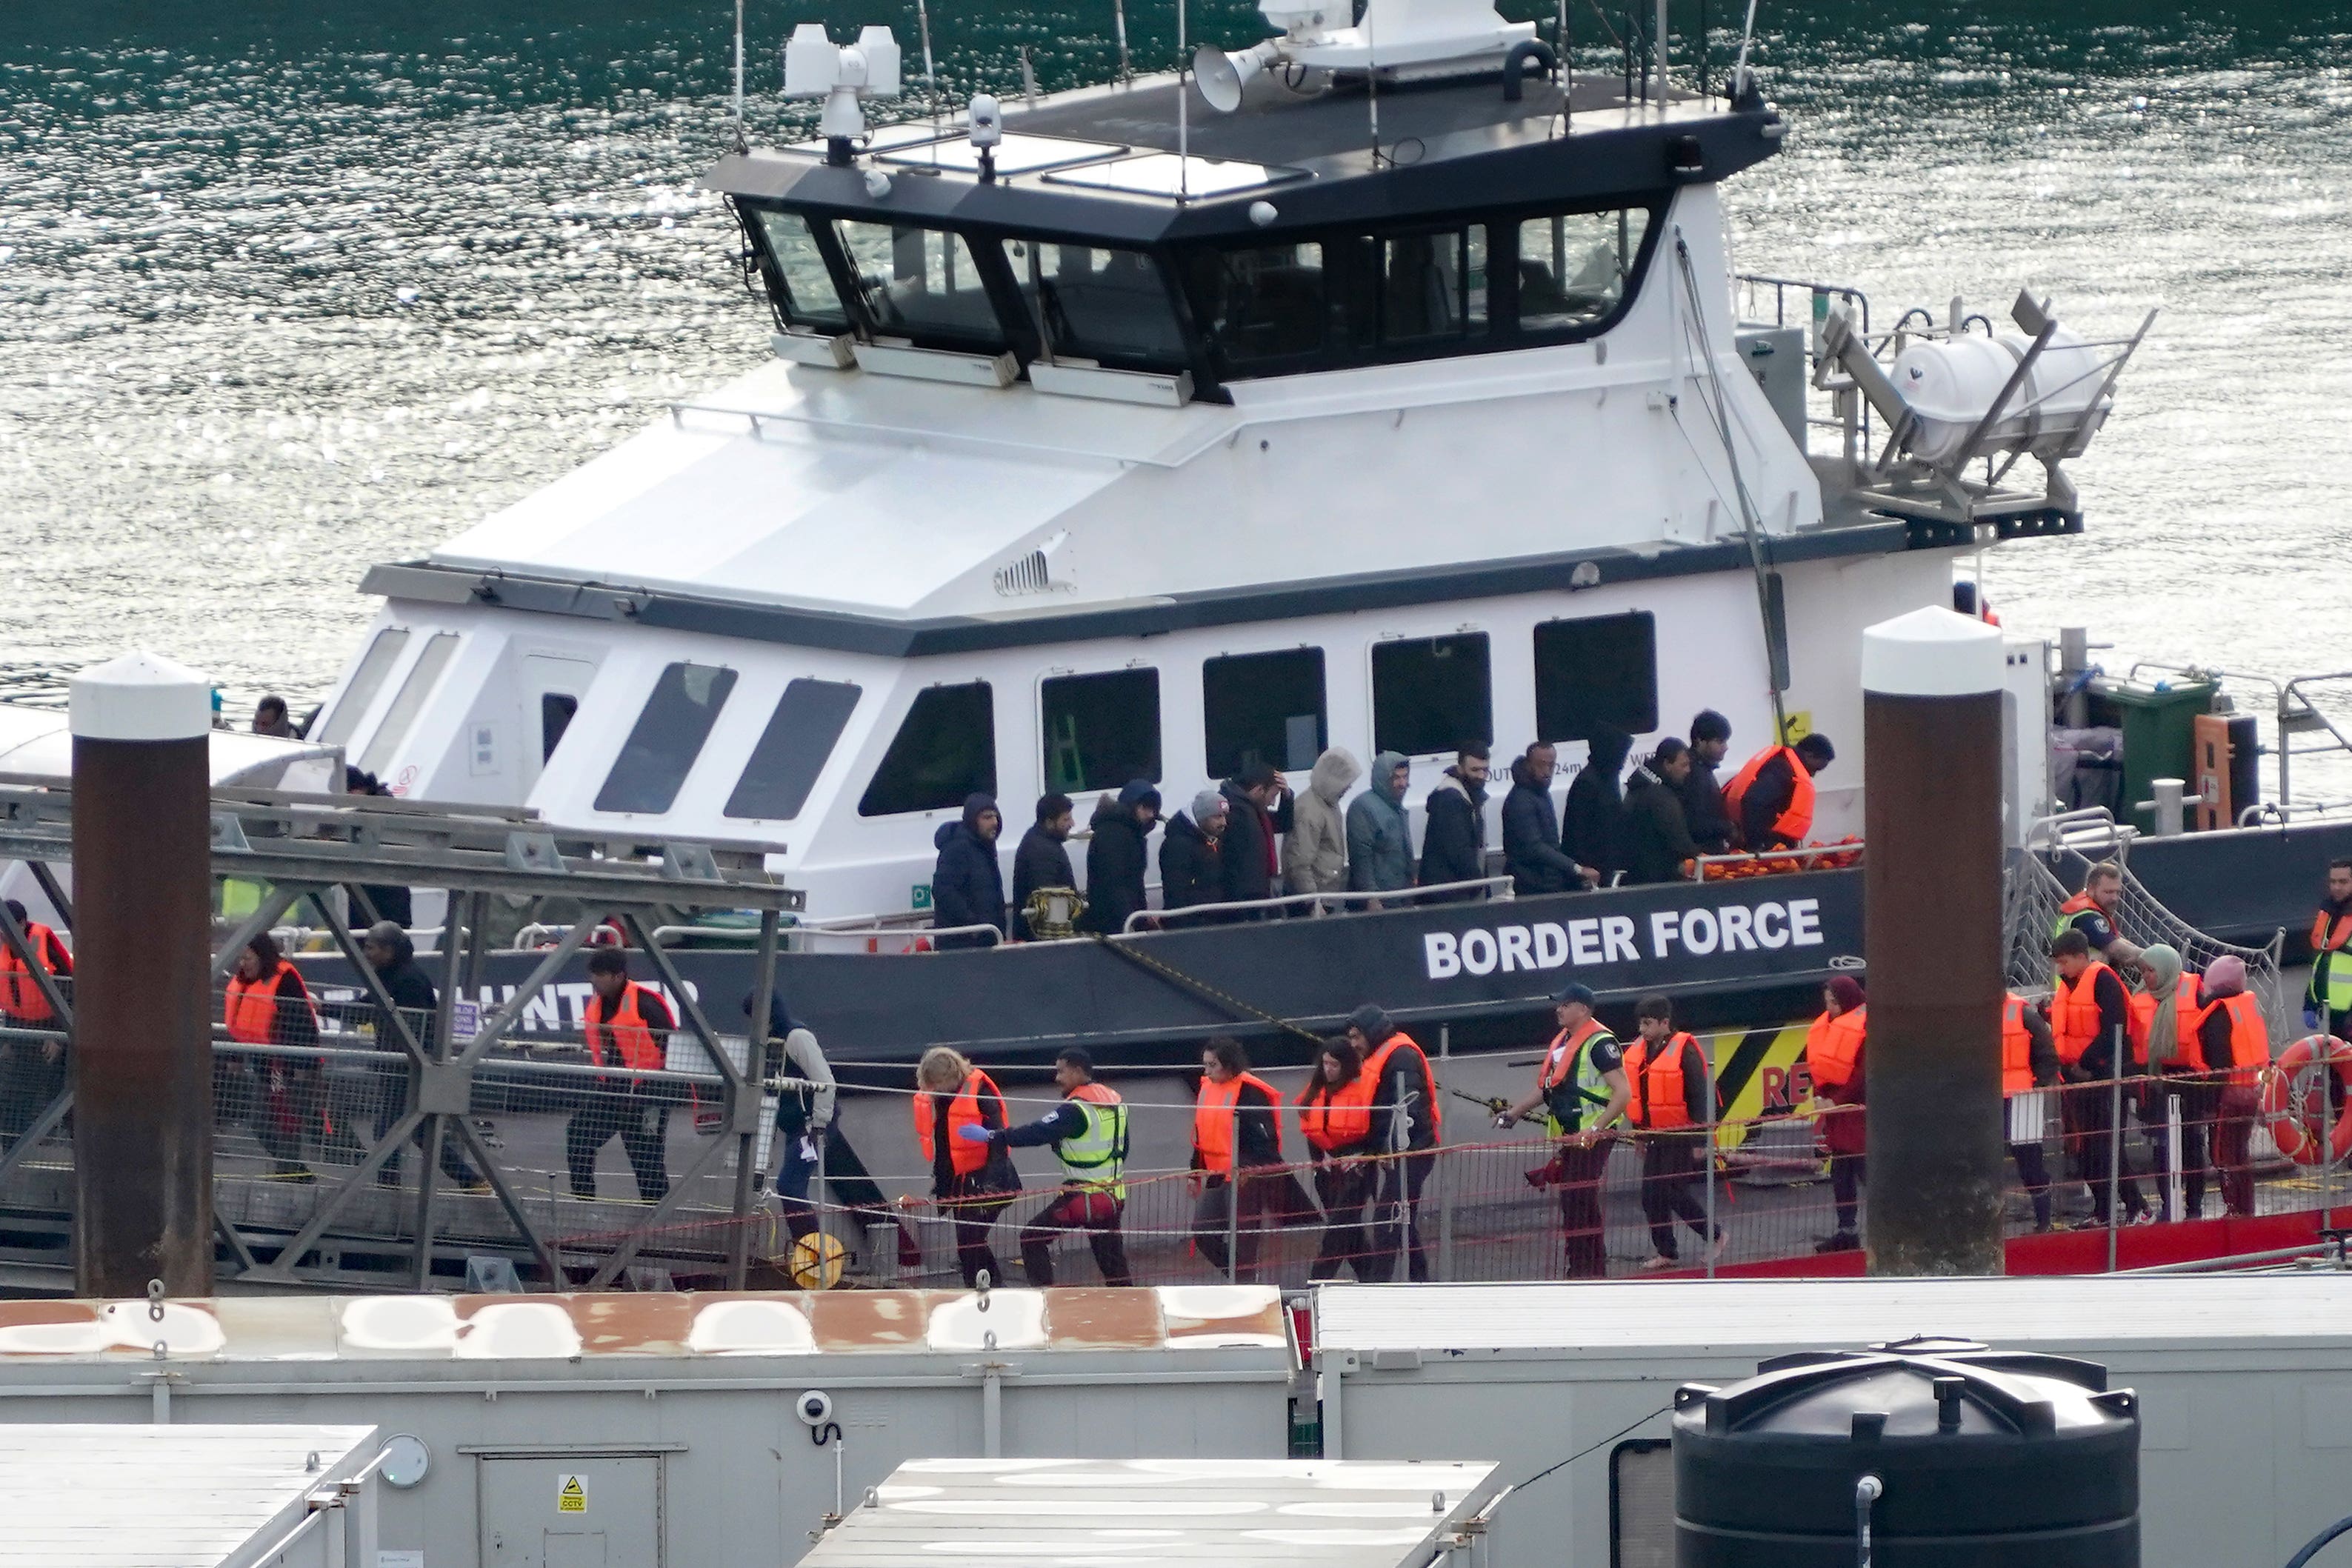 A group of people thought to be migrants are brought in to Dover, Kent, from a Border Force vessel